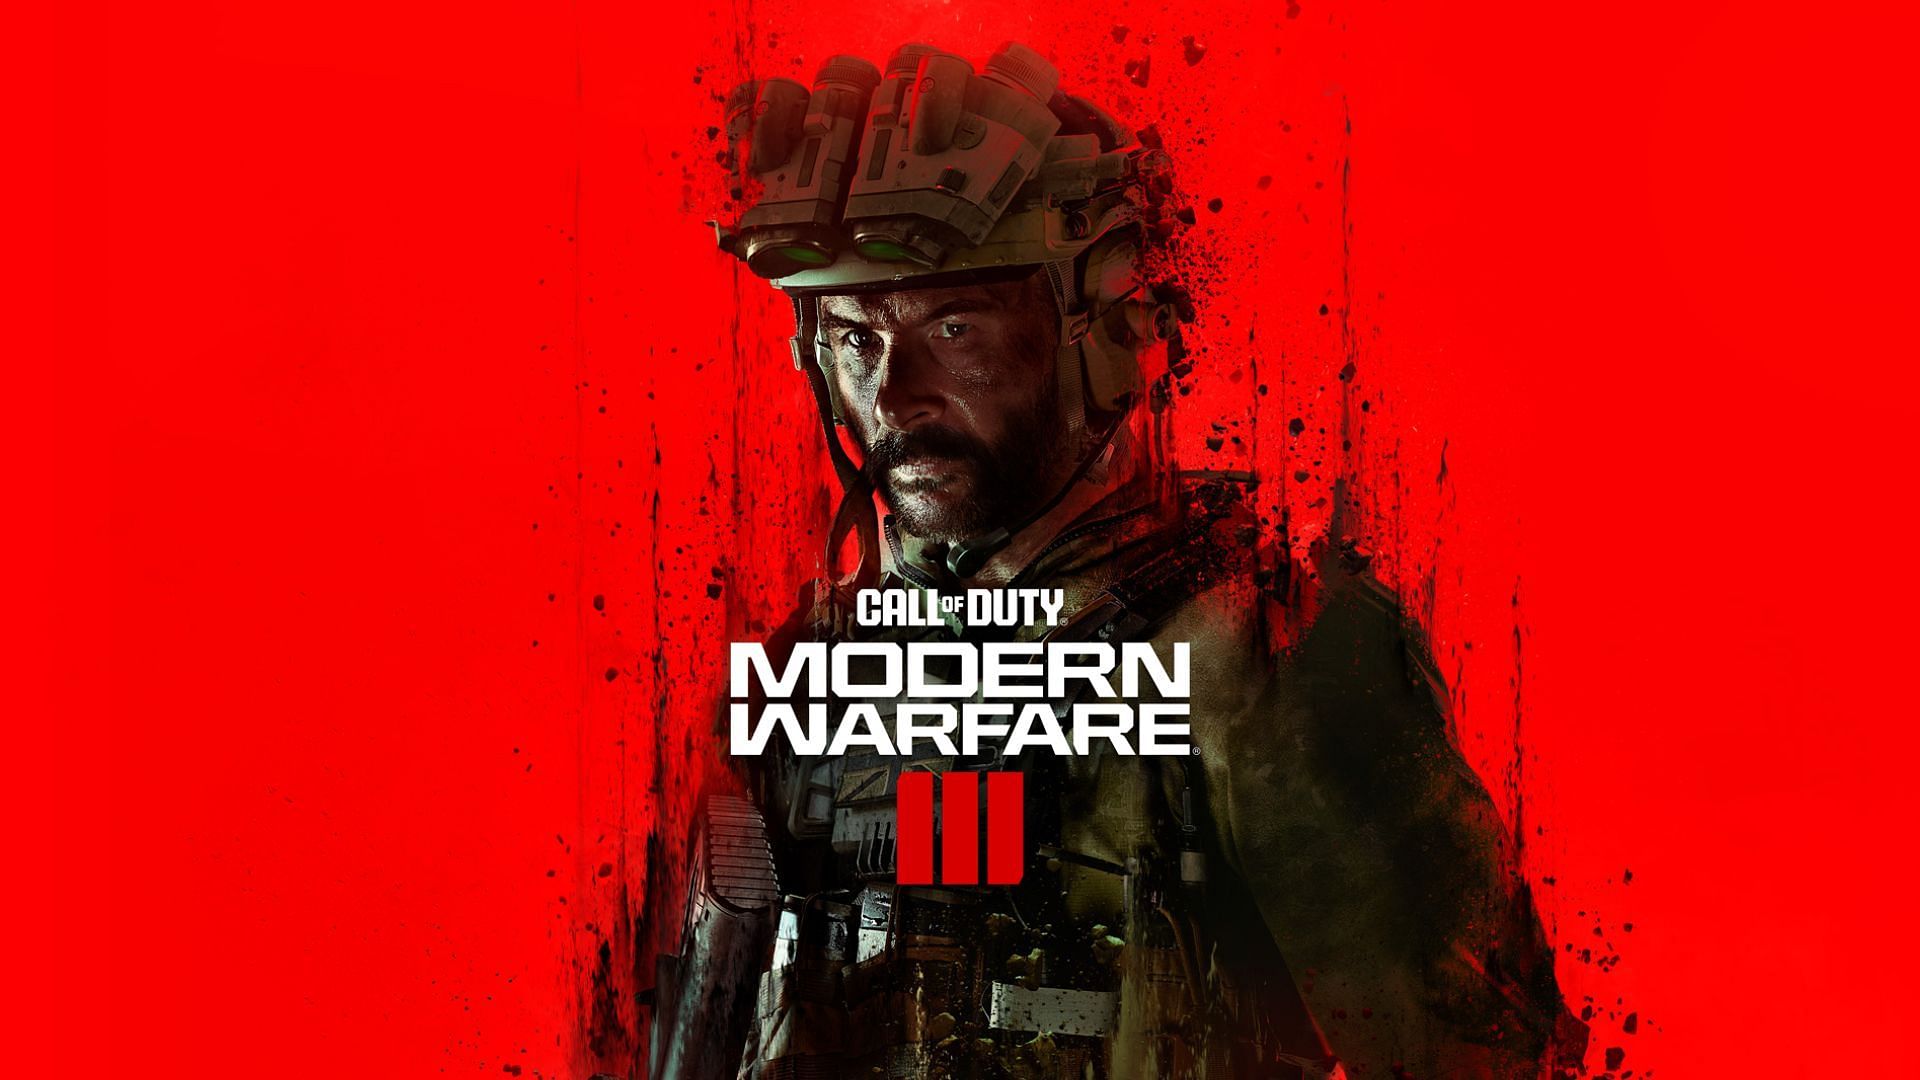 Modern Warfare story to continue beyond MW3 according to Infinity Ward Narrative Director (Image via Activision)